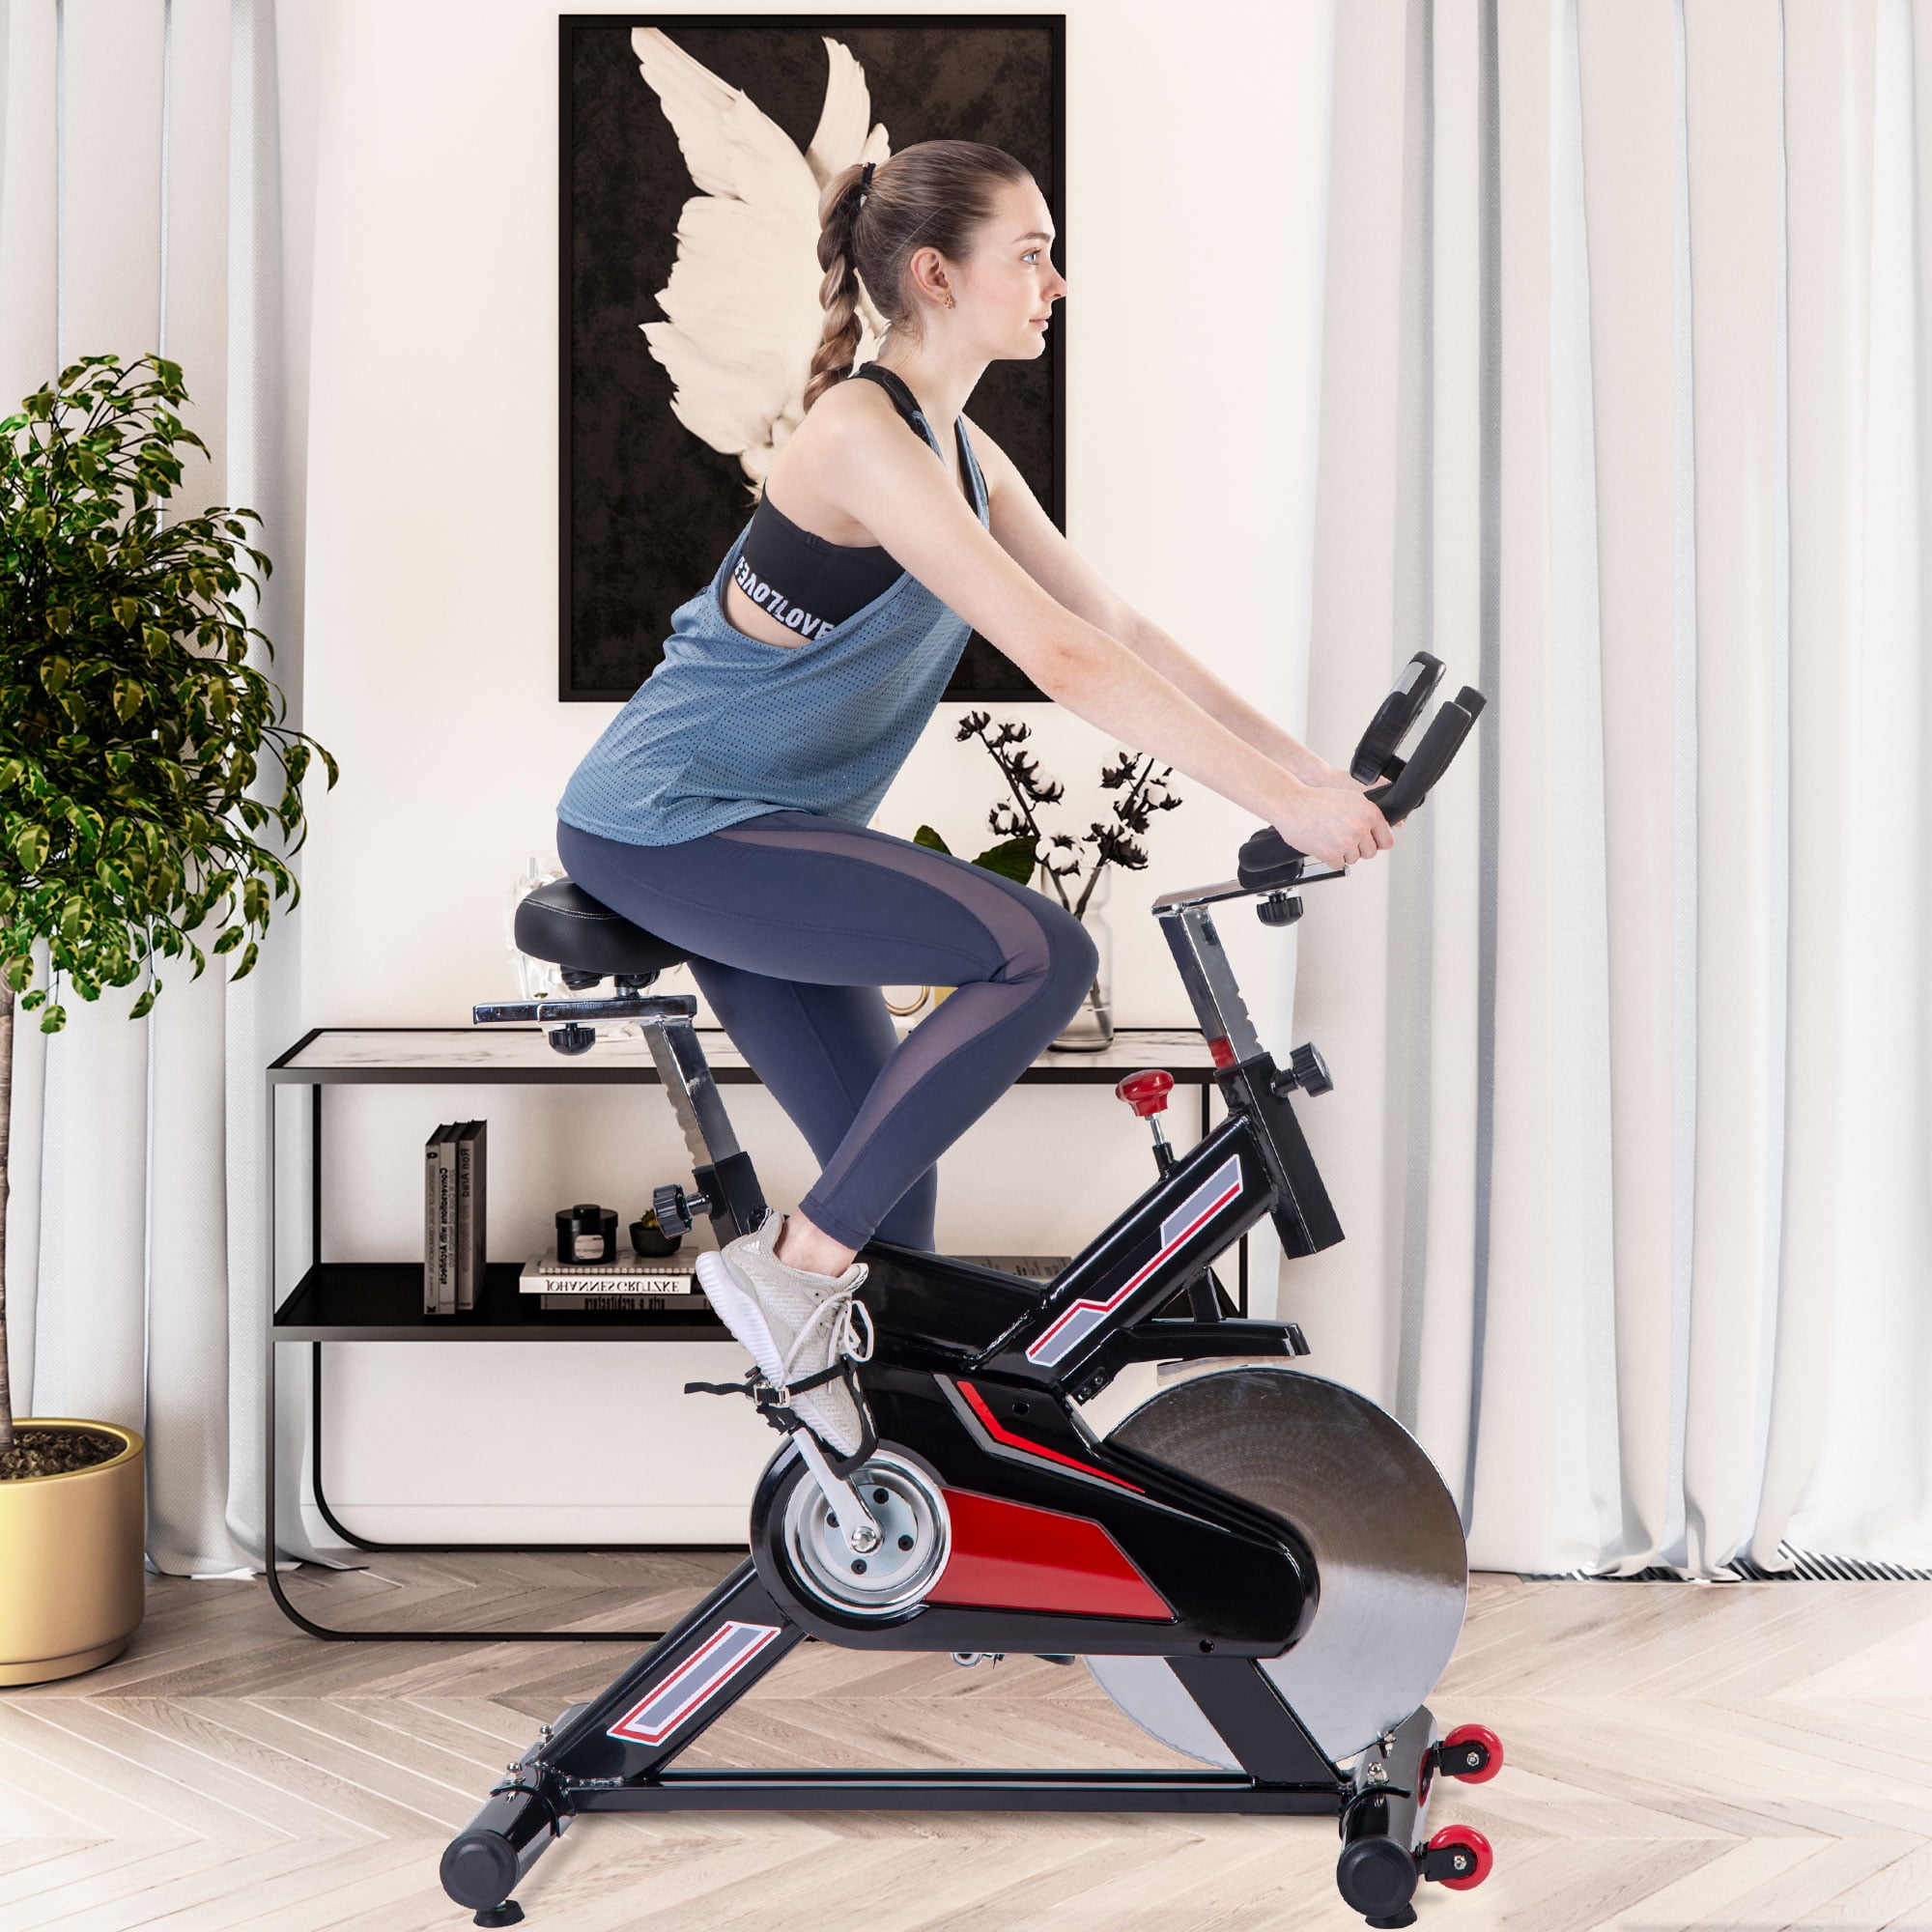 Exercise Bike Cardio Workout Machine Home Gym Fitness Training Indoor Cycling 